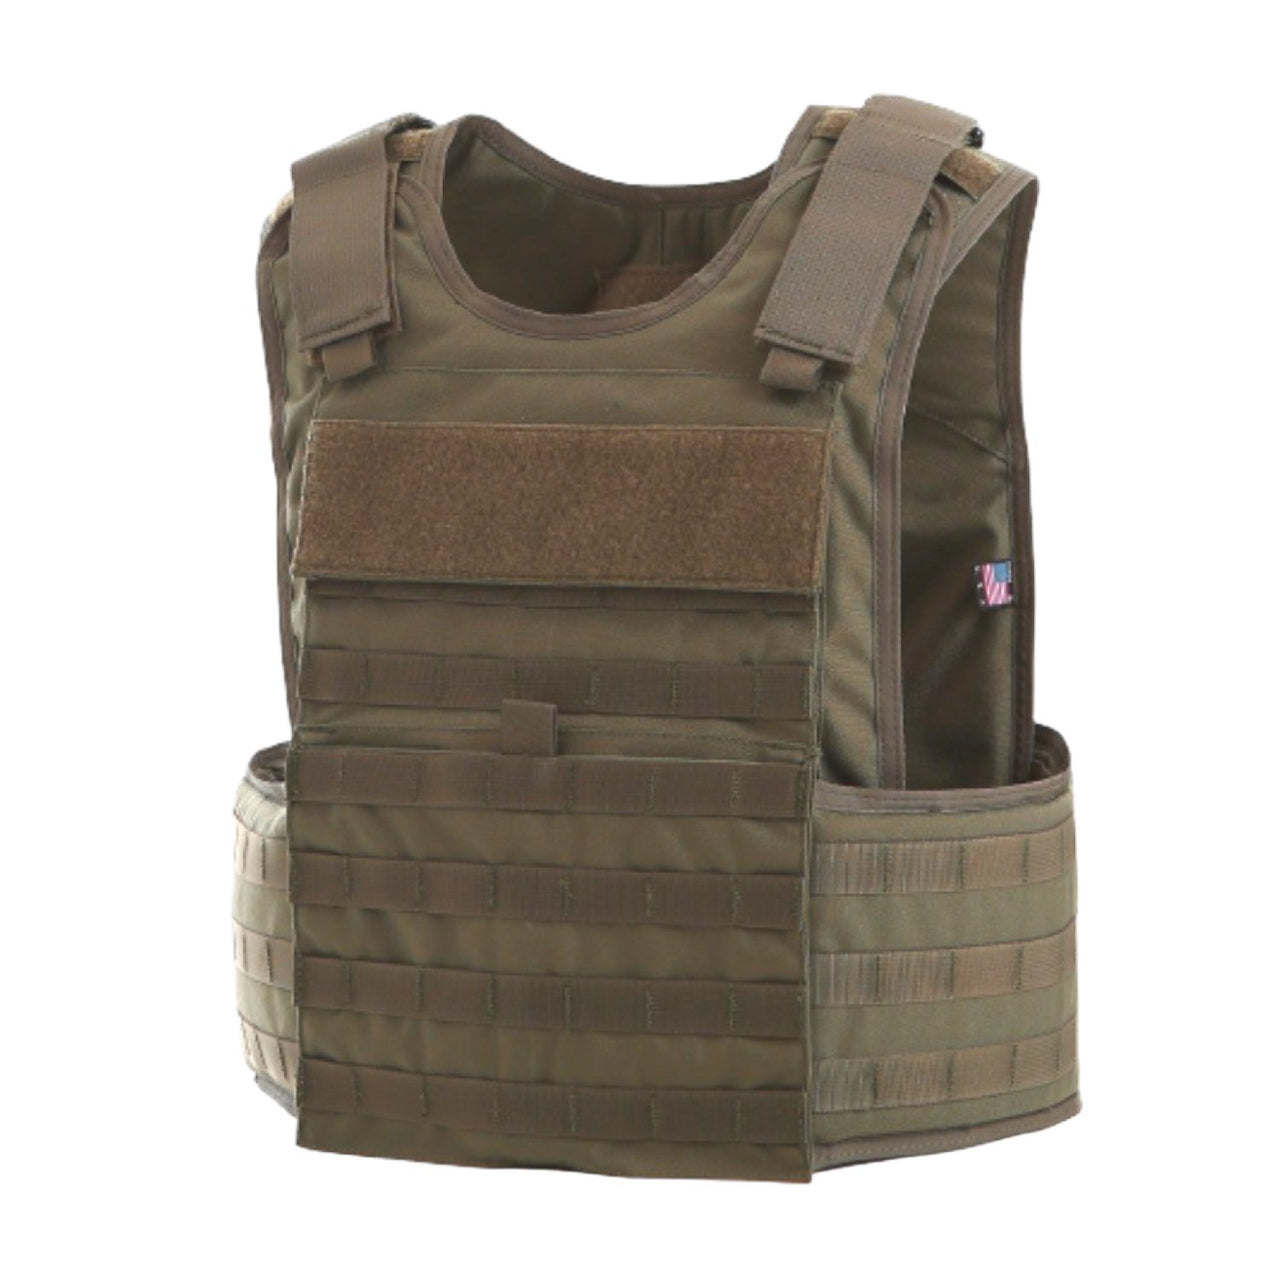 An olive green Body Armor Direct Multi-Threat Tactical Carrier vest with multiple pouches and patch areas, viewed on a plain white background.